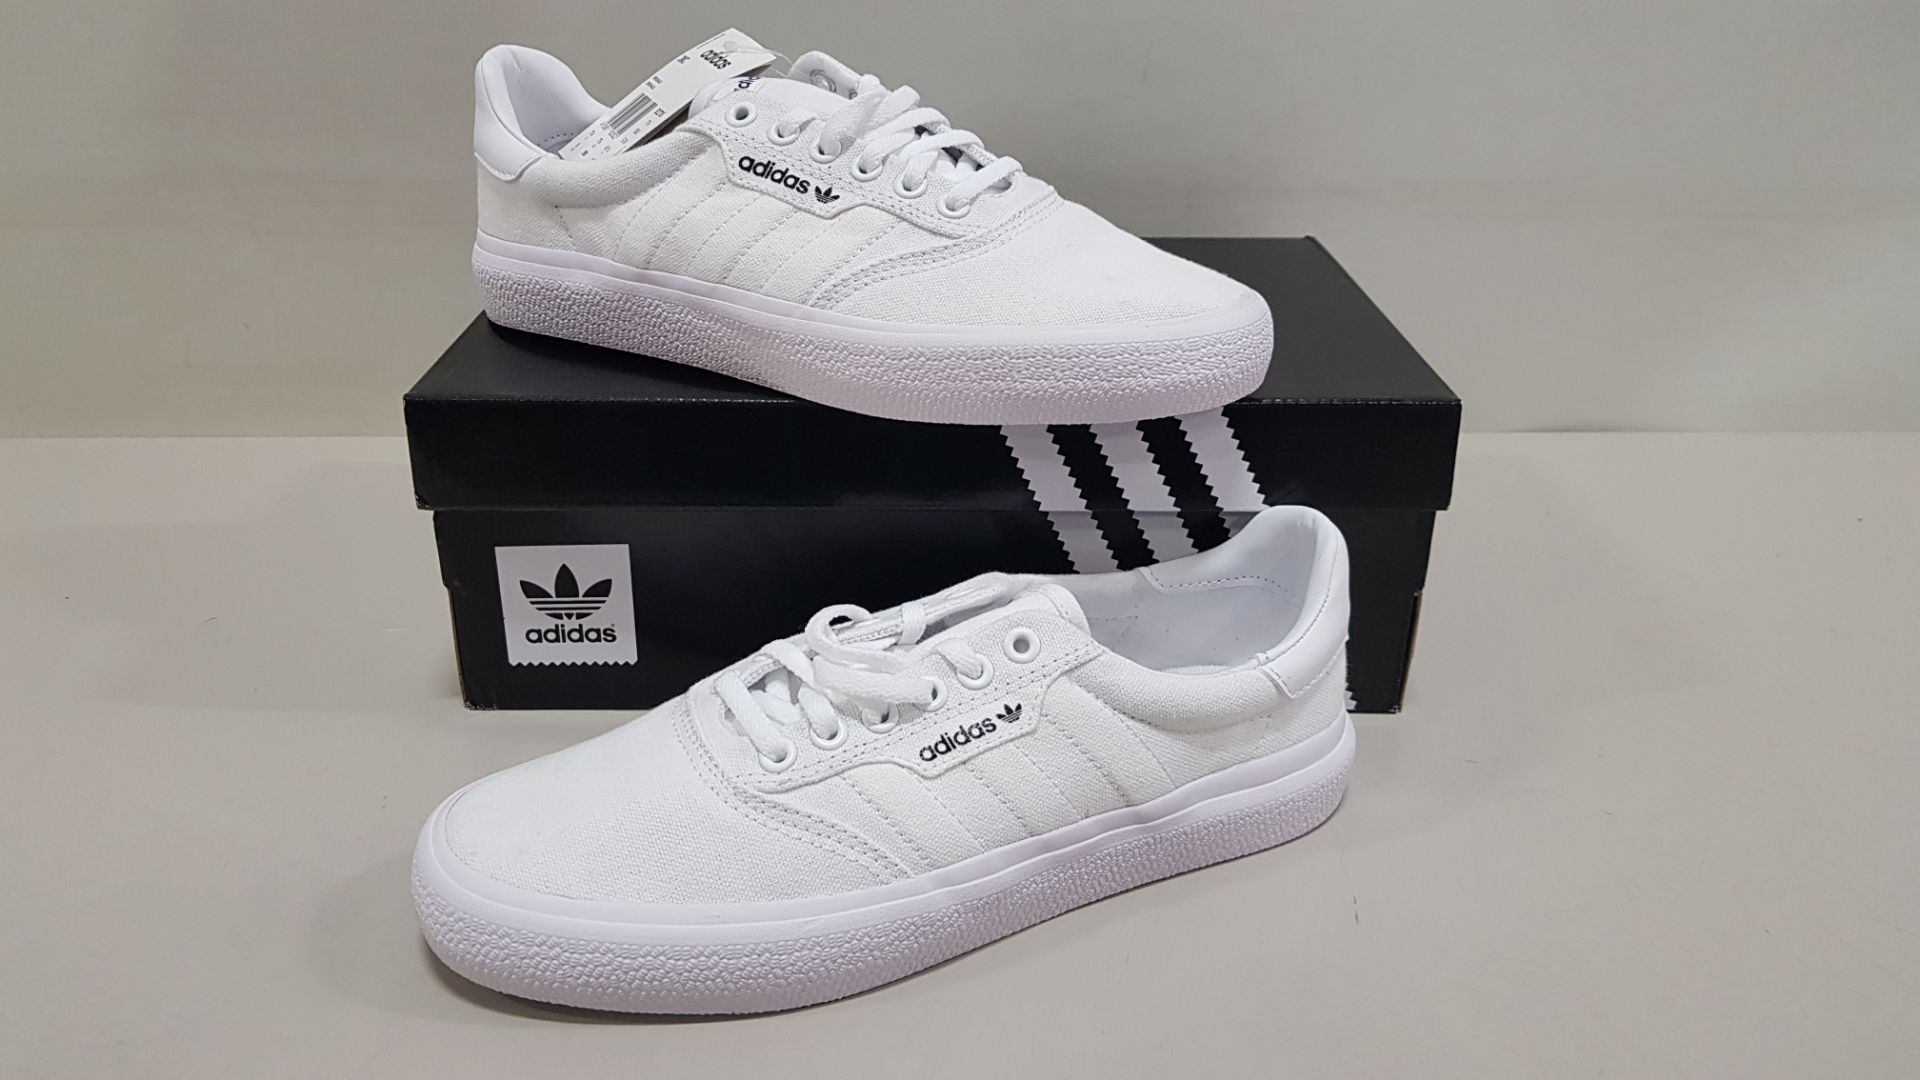 5 X ADIDAS ORIGINALS TRIPLE WHITE 3MC TRAINERS UK SIZE 5.5 AND 7 (PLEASE NOTE SOME SHOES ARE